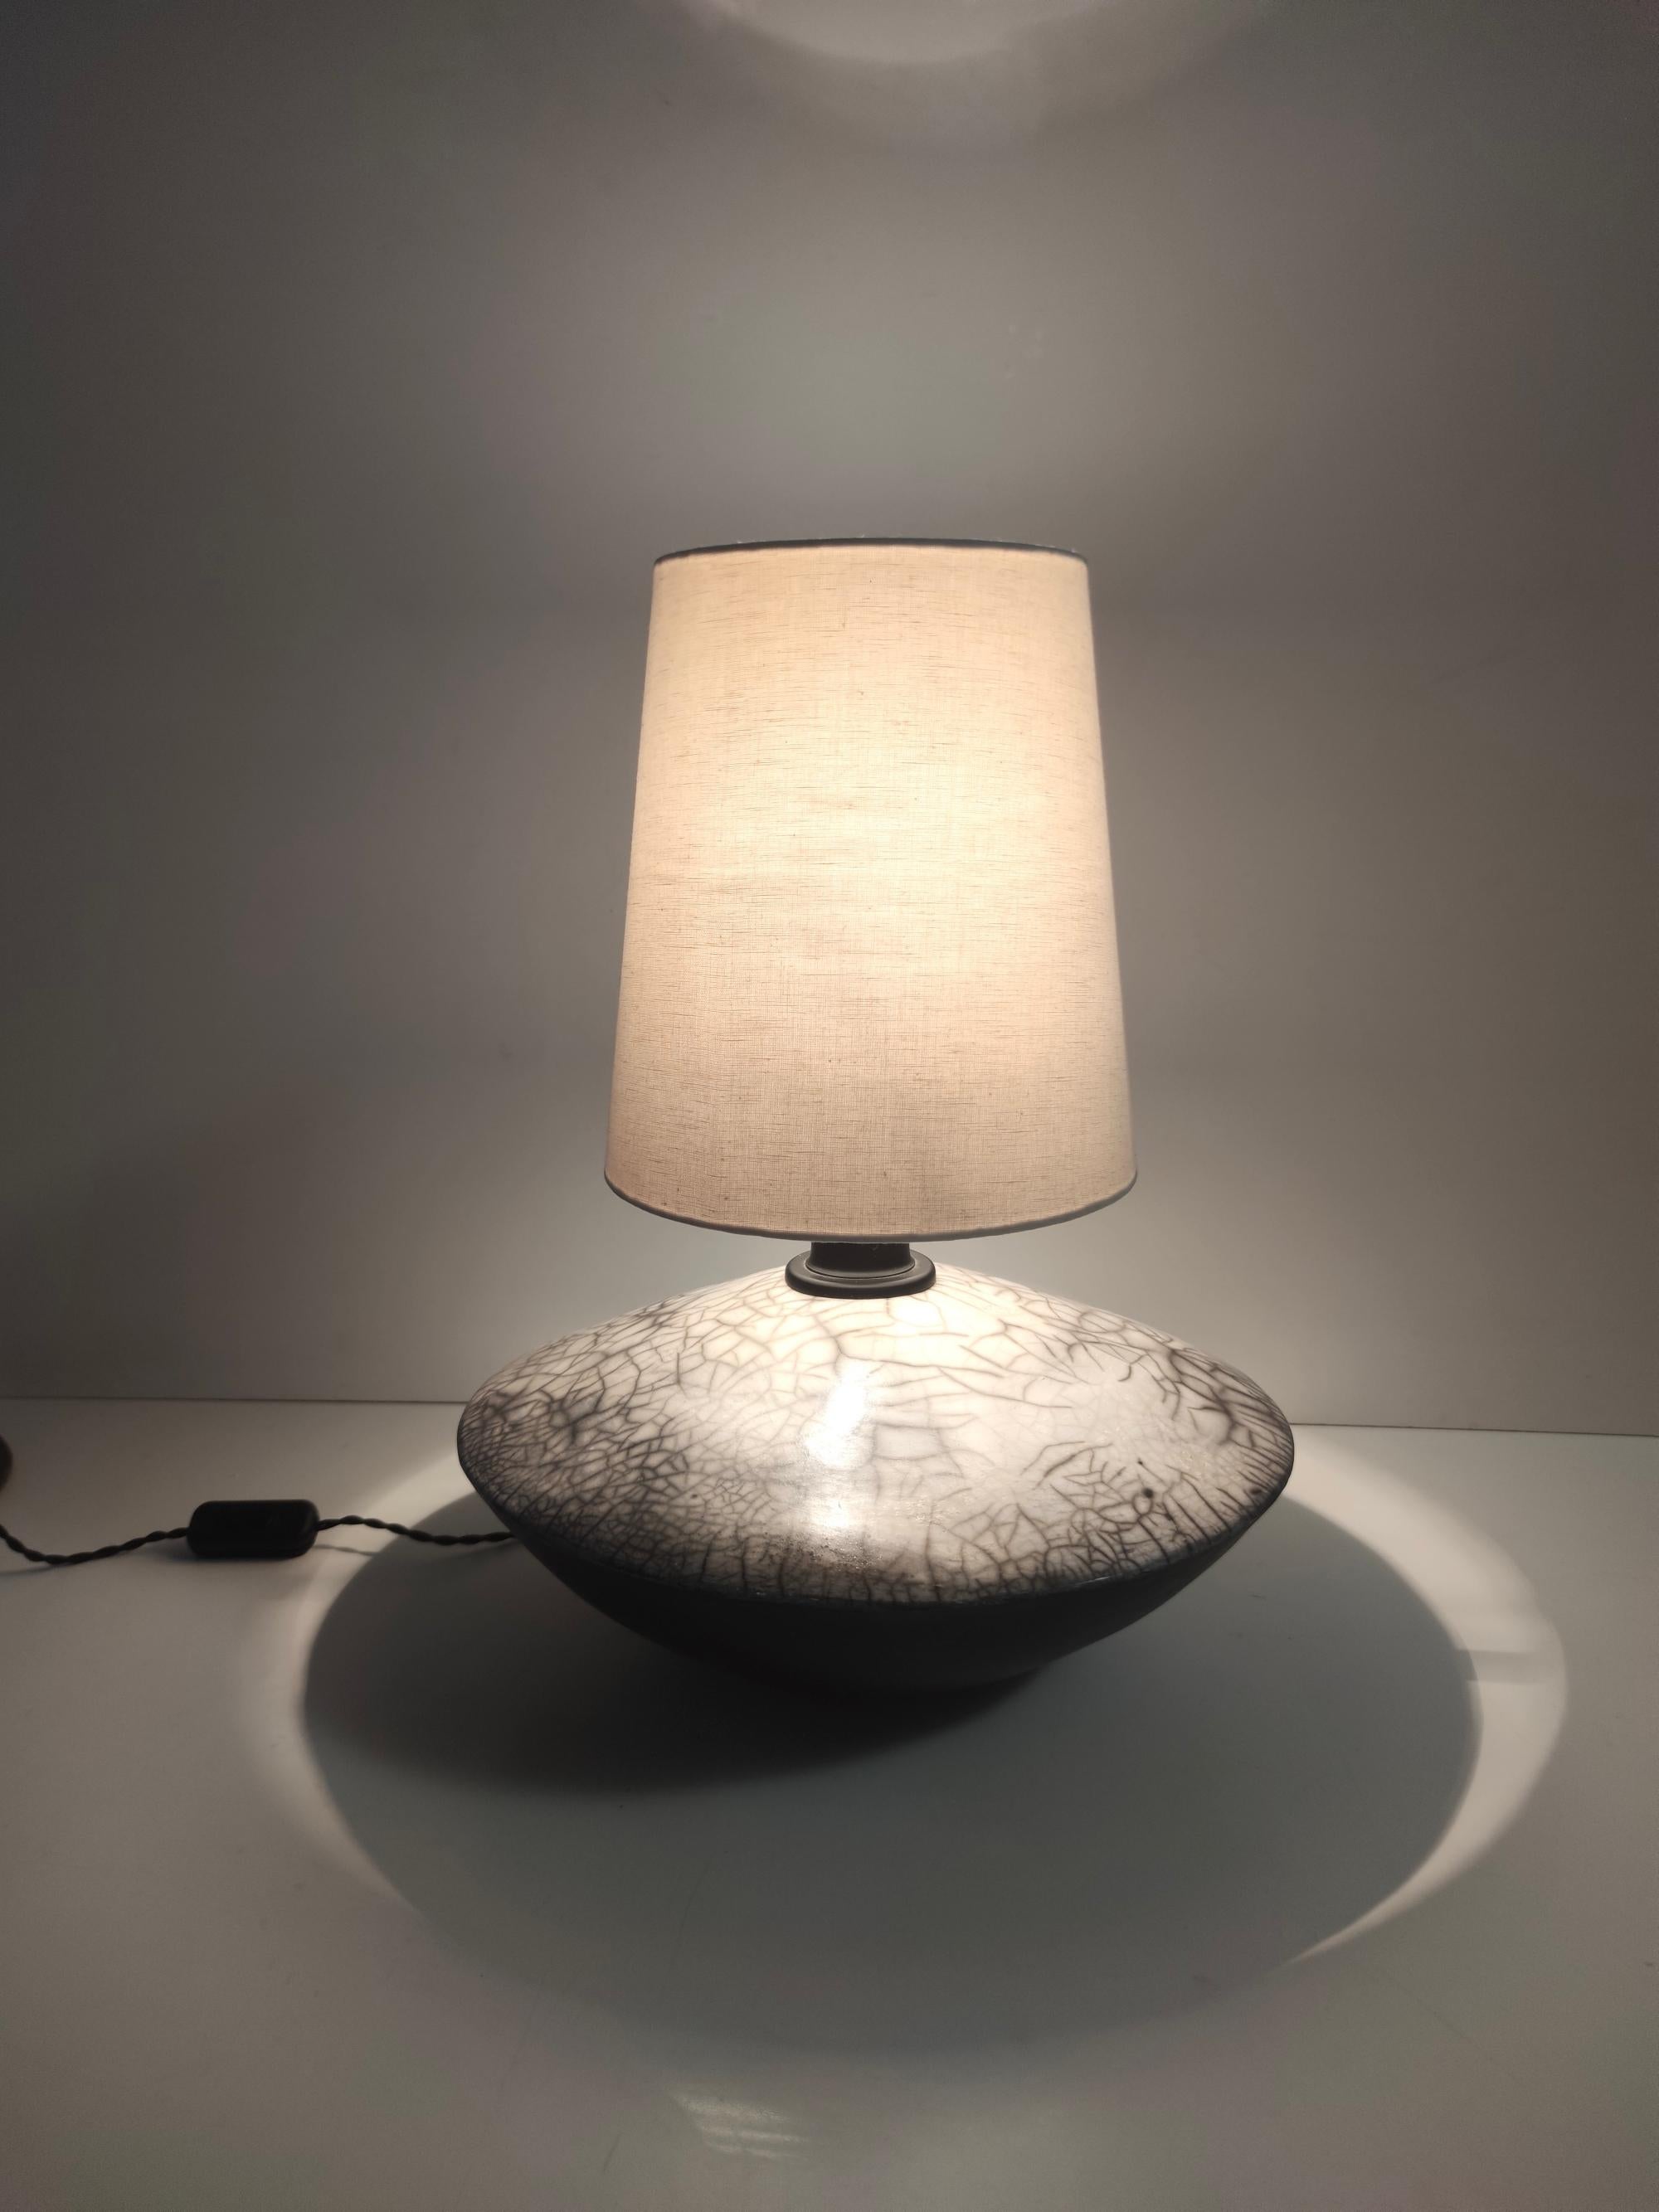 Made in Italy, 1980s.
It is signed but the signature is not comprehensible.
The lamp features an handmade rake ceramic base and a fabric lampshade.
The wiring has been inspected and is compatible with the US. 
It might show slight traces of use